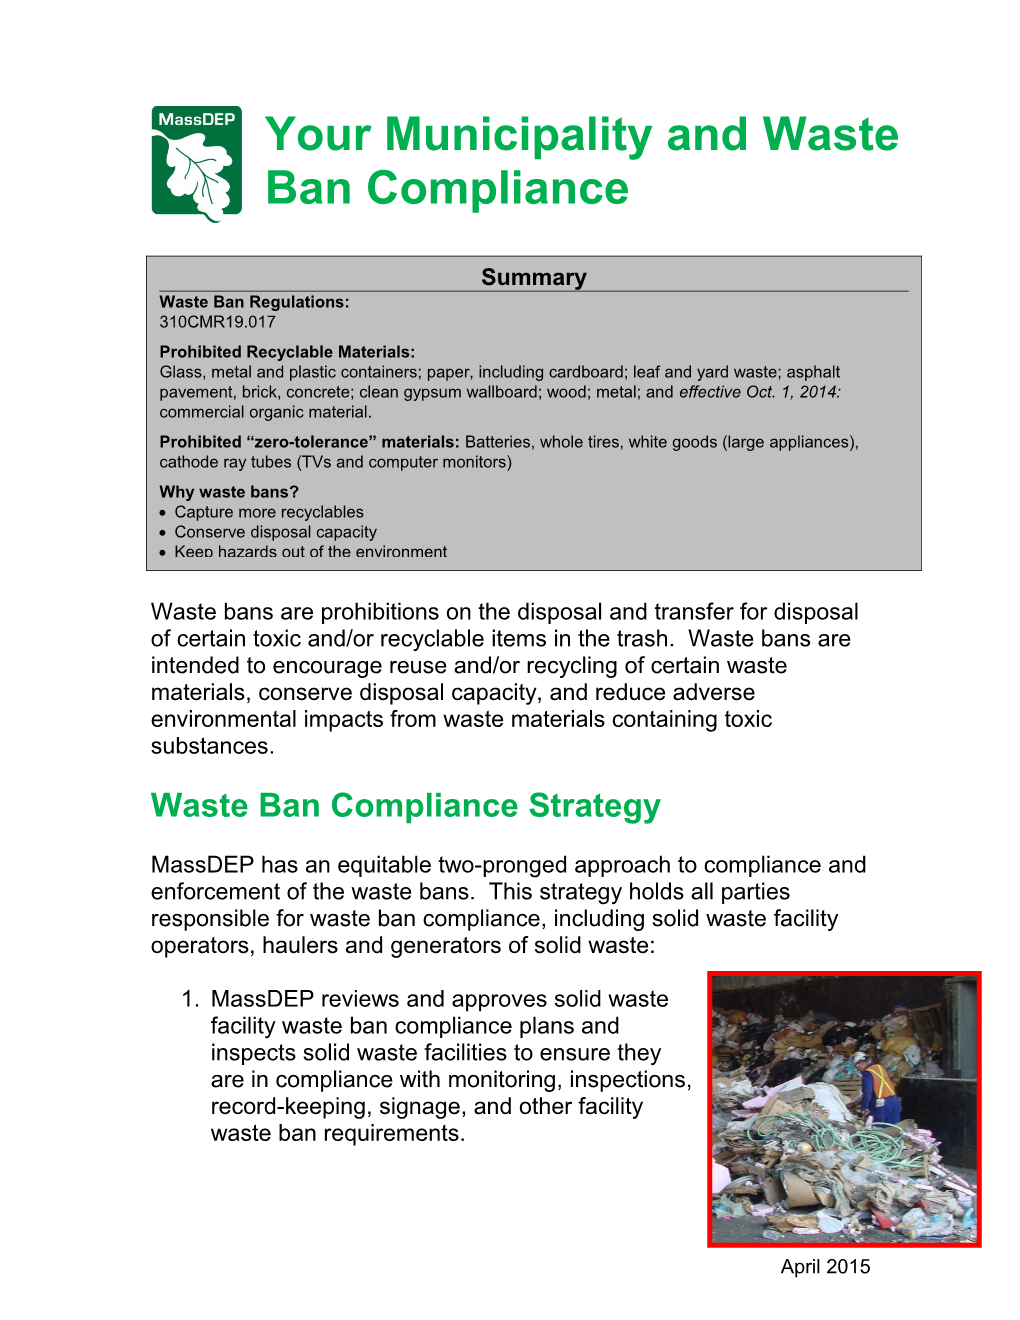 Waste Ban Compliance Strategy